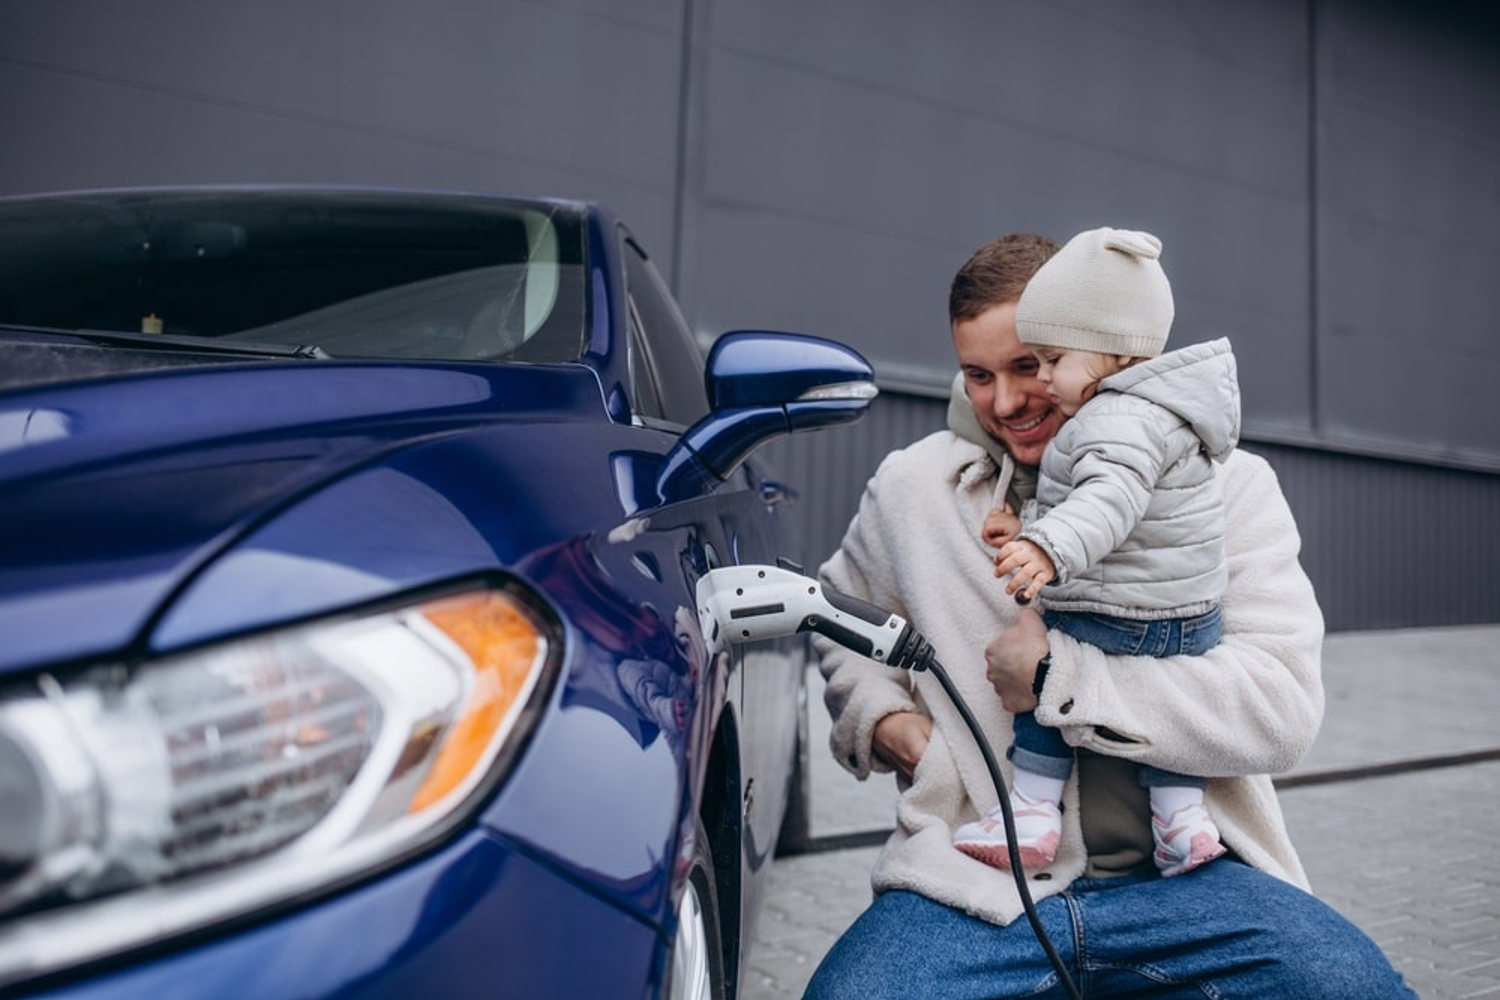 Man lifting his infant soon to charge their EV.